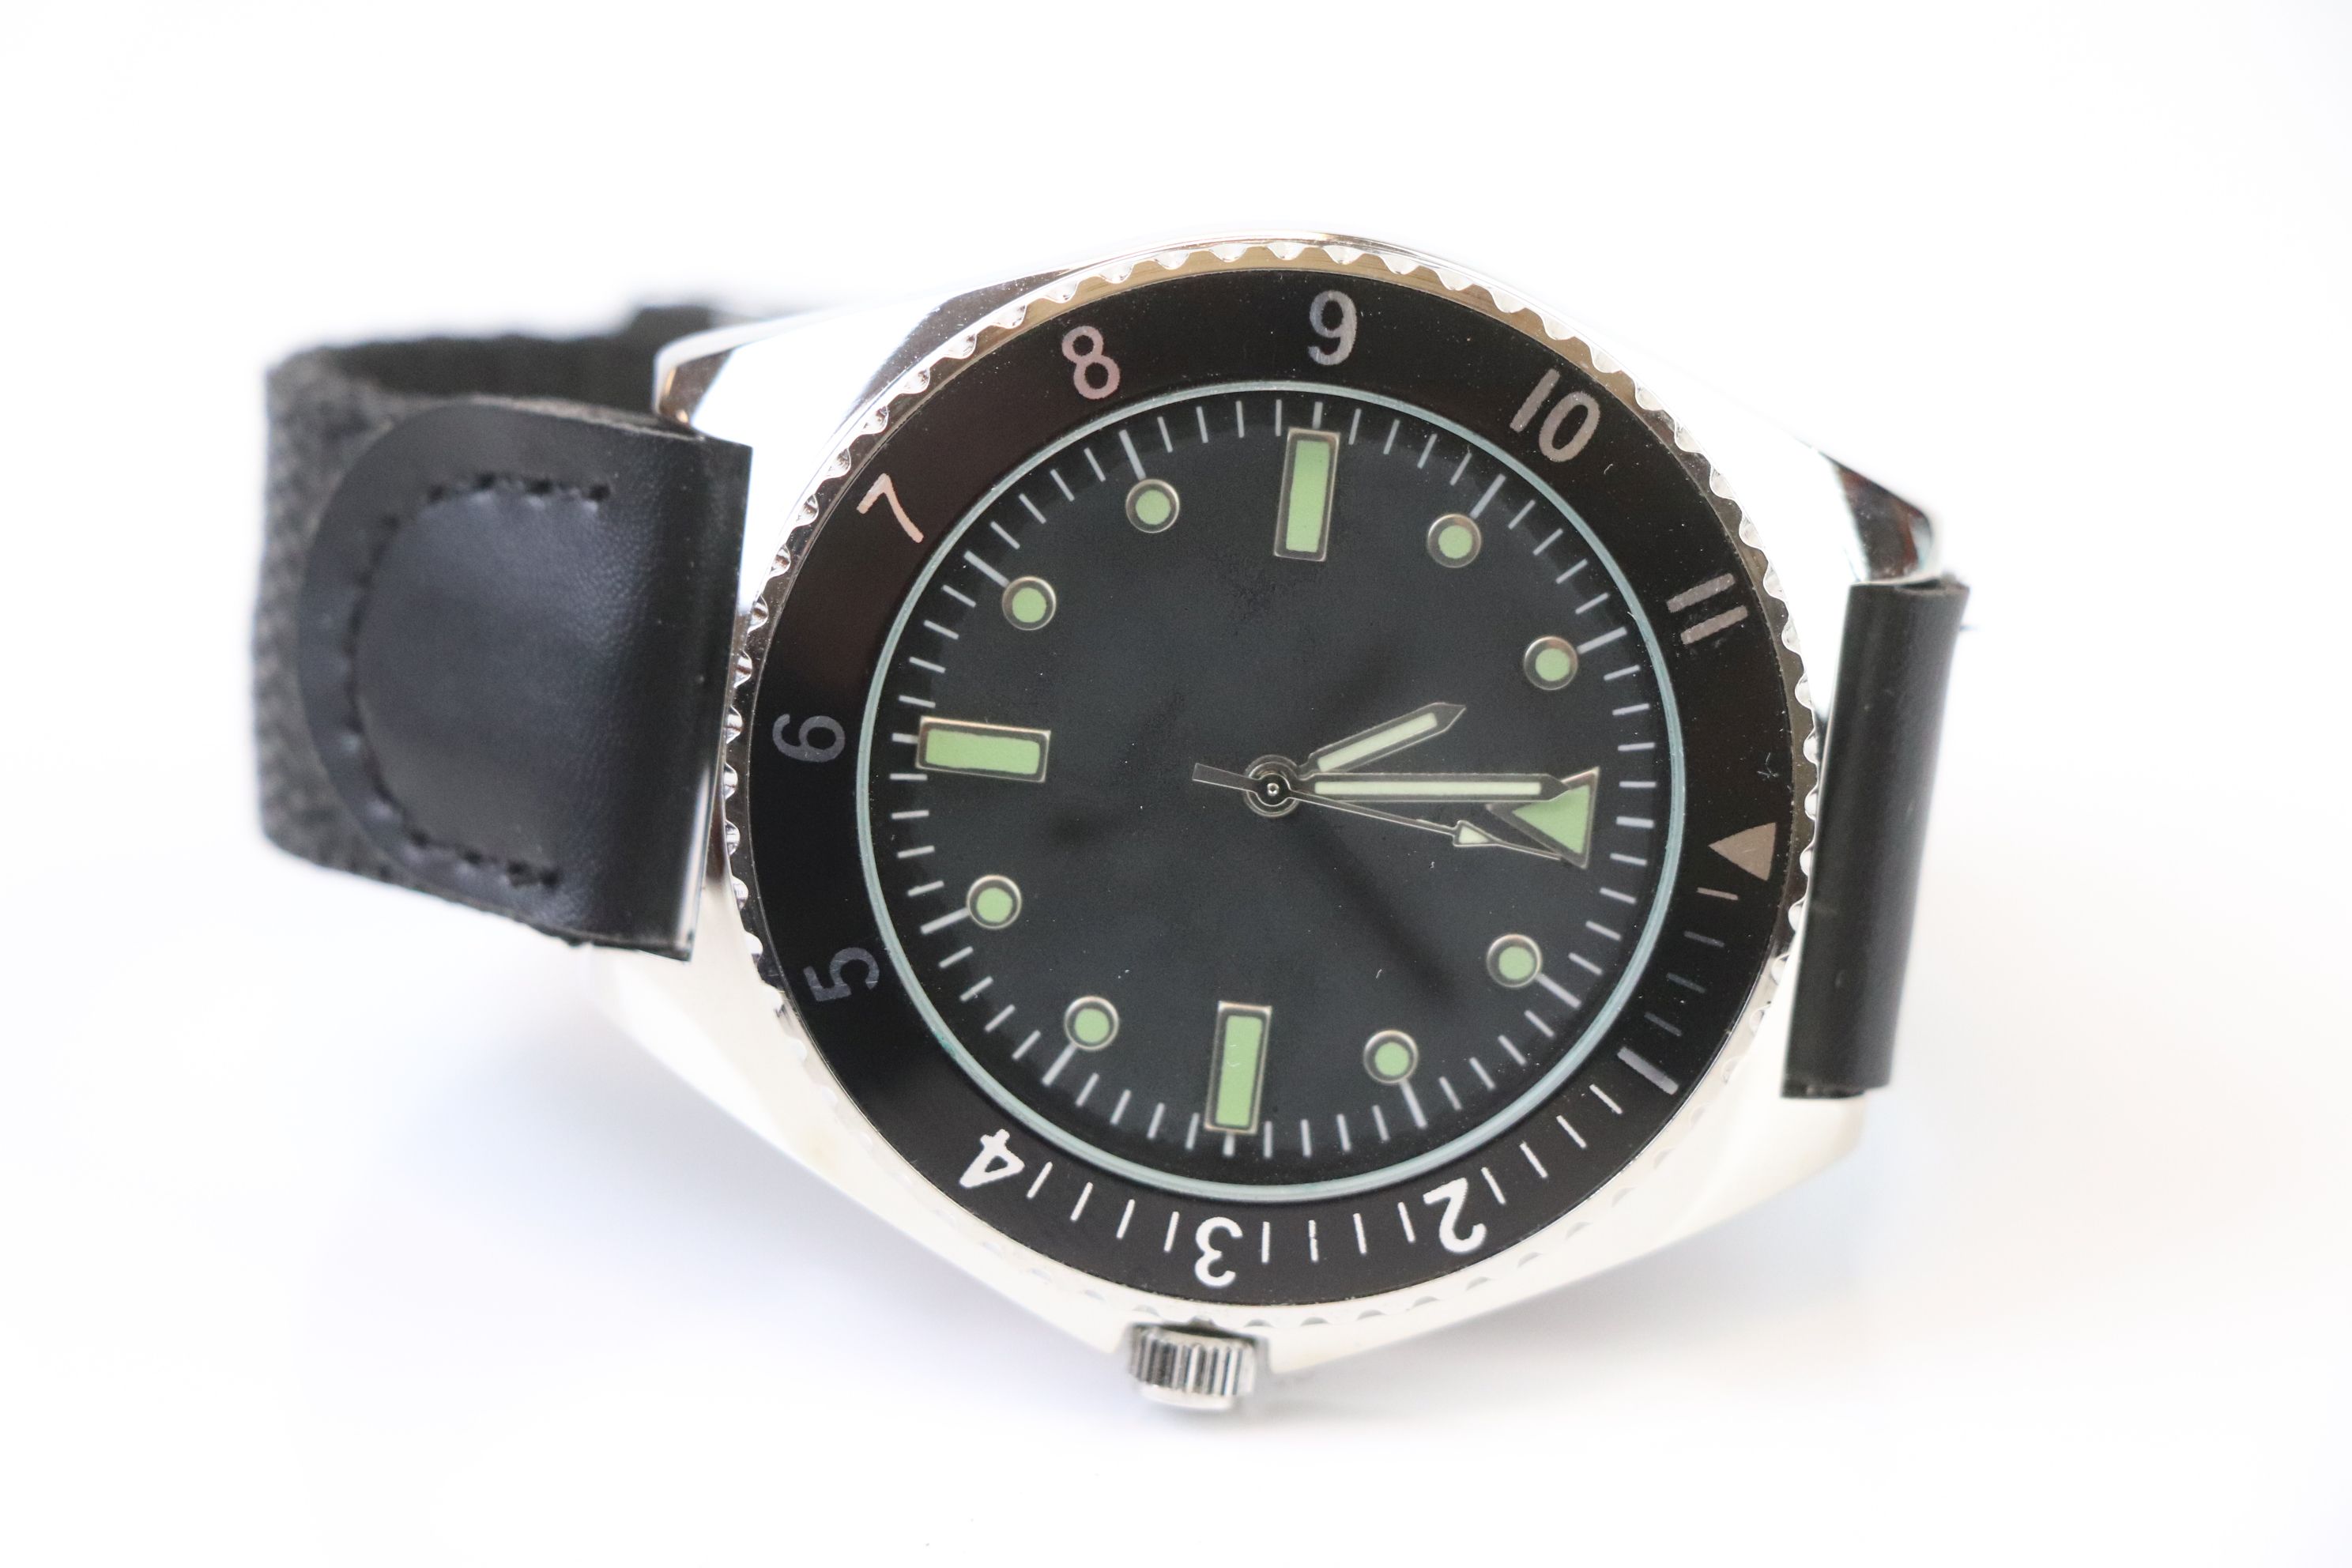 United States Navy Diver style Military Watch - Image 2 of 4